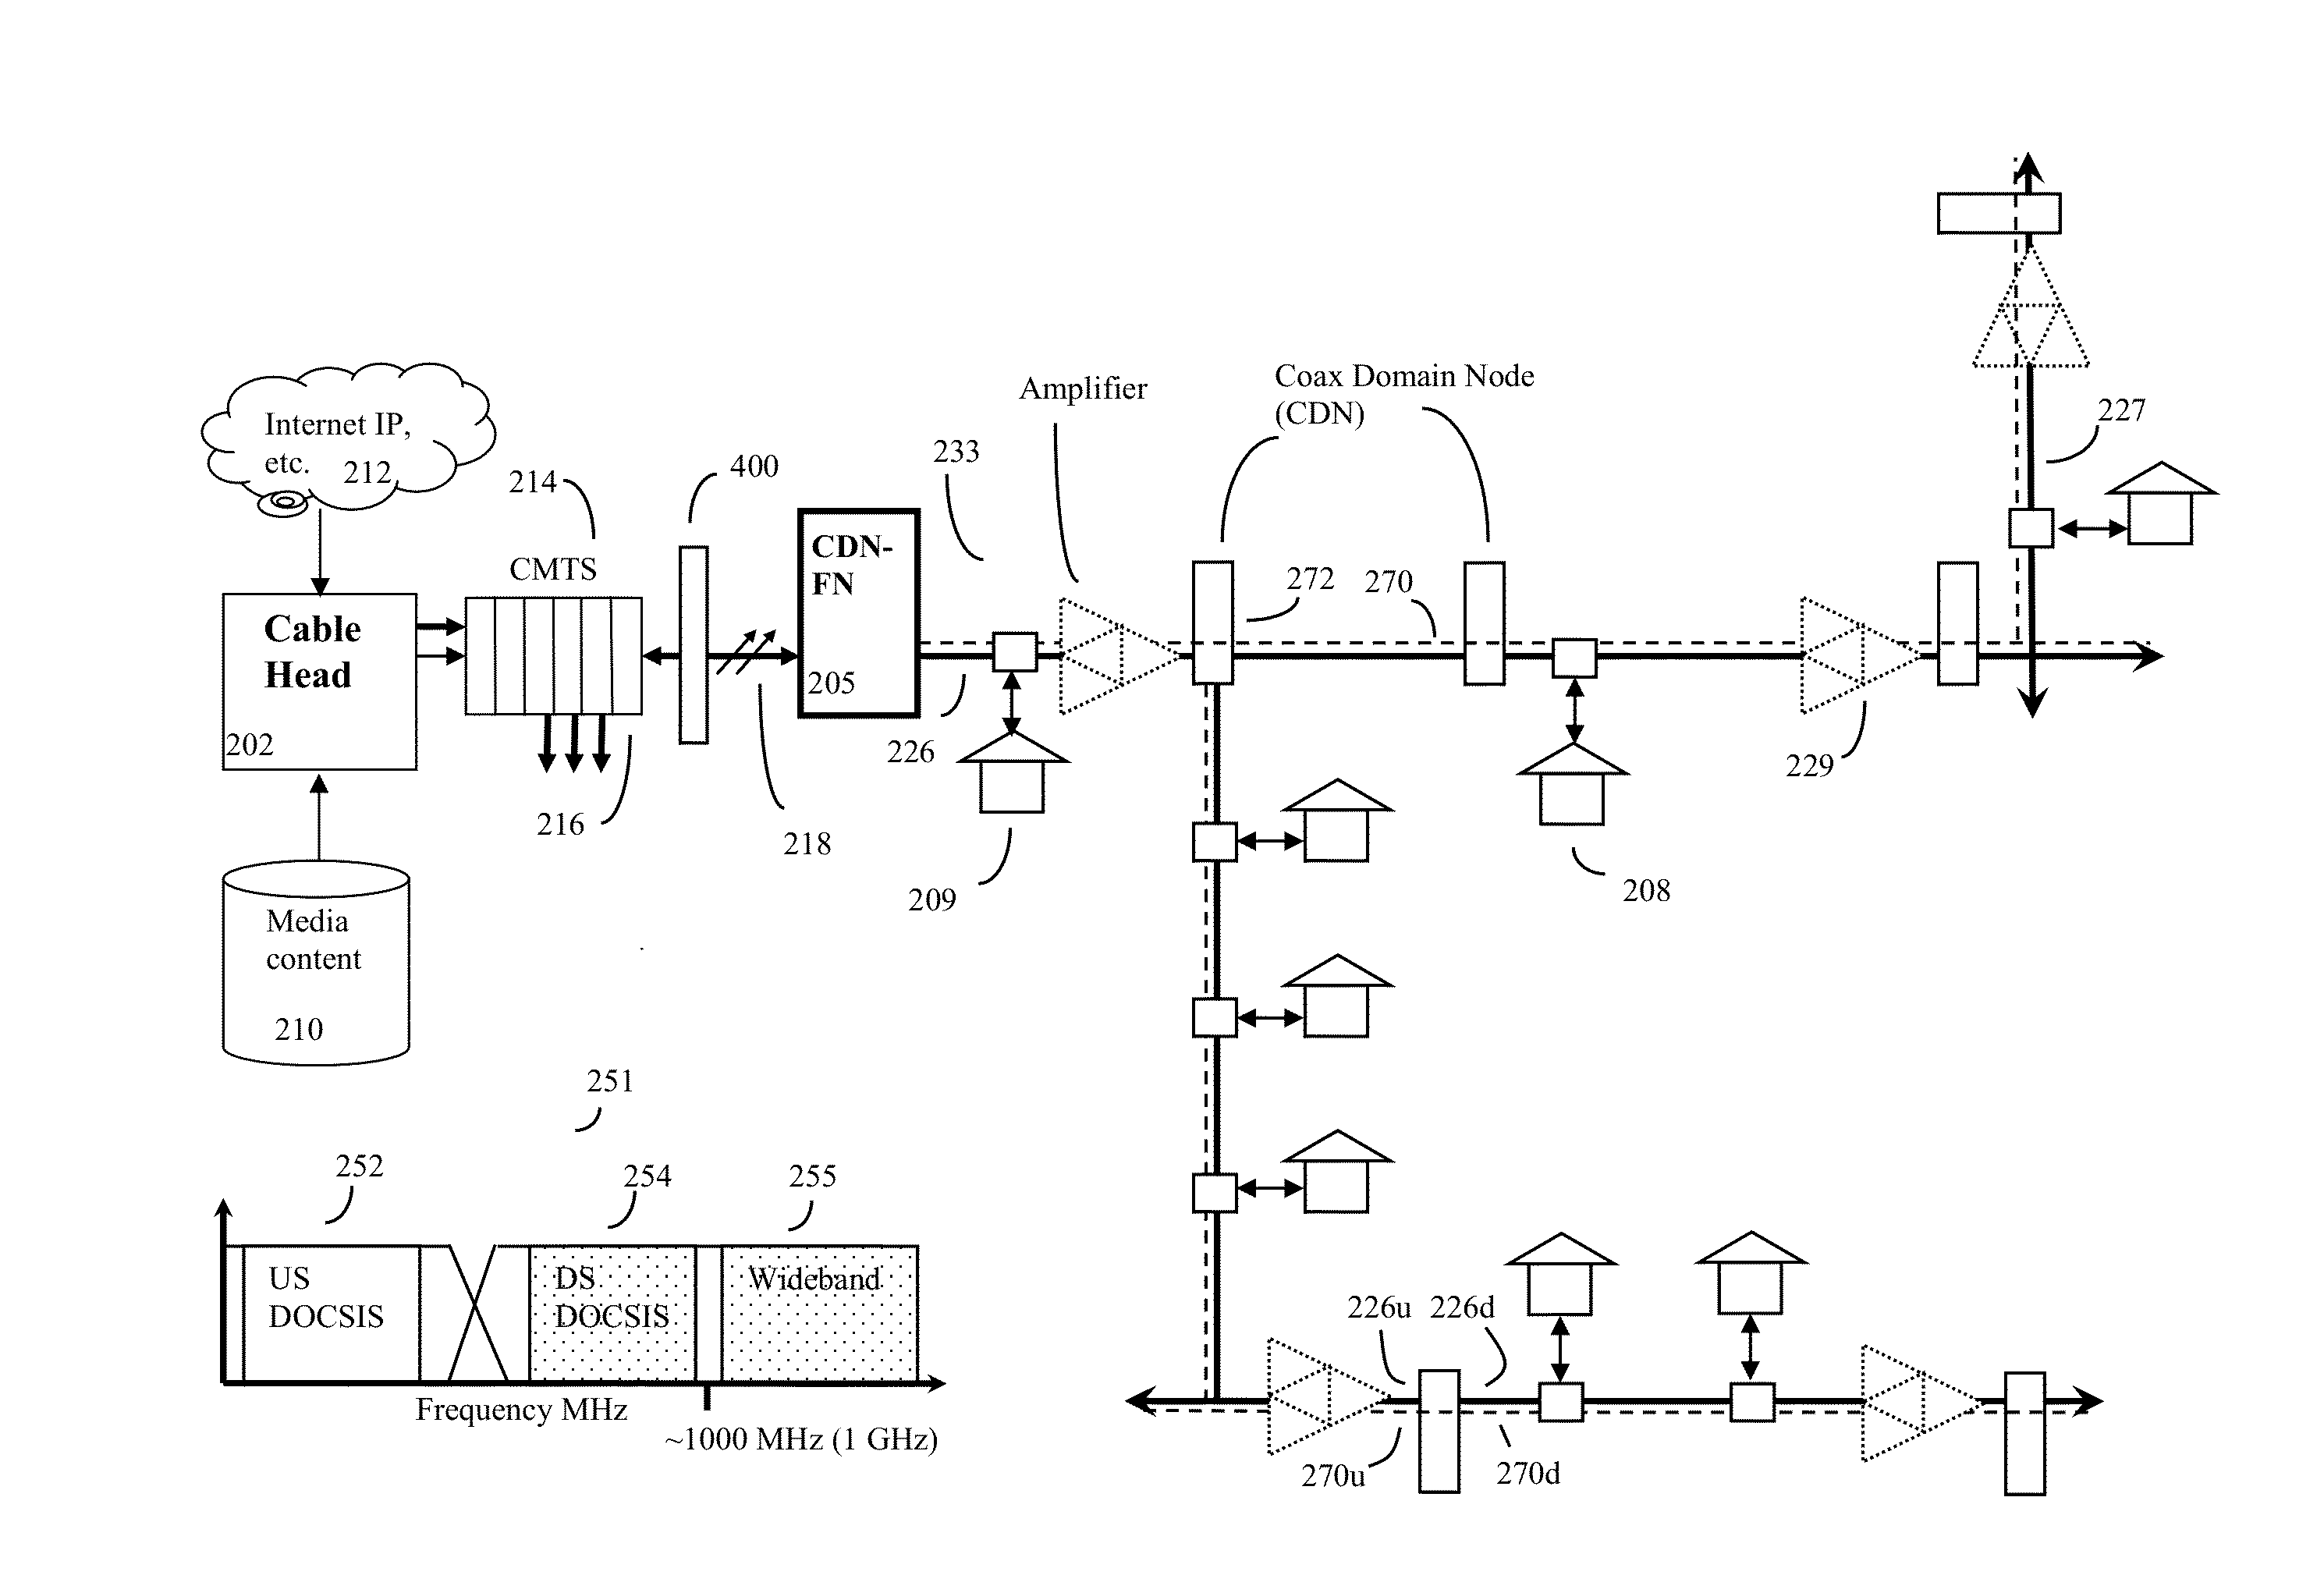 Hfc cable system with alternative wideband communications pathways and coax domain amplifier-repeaters